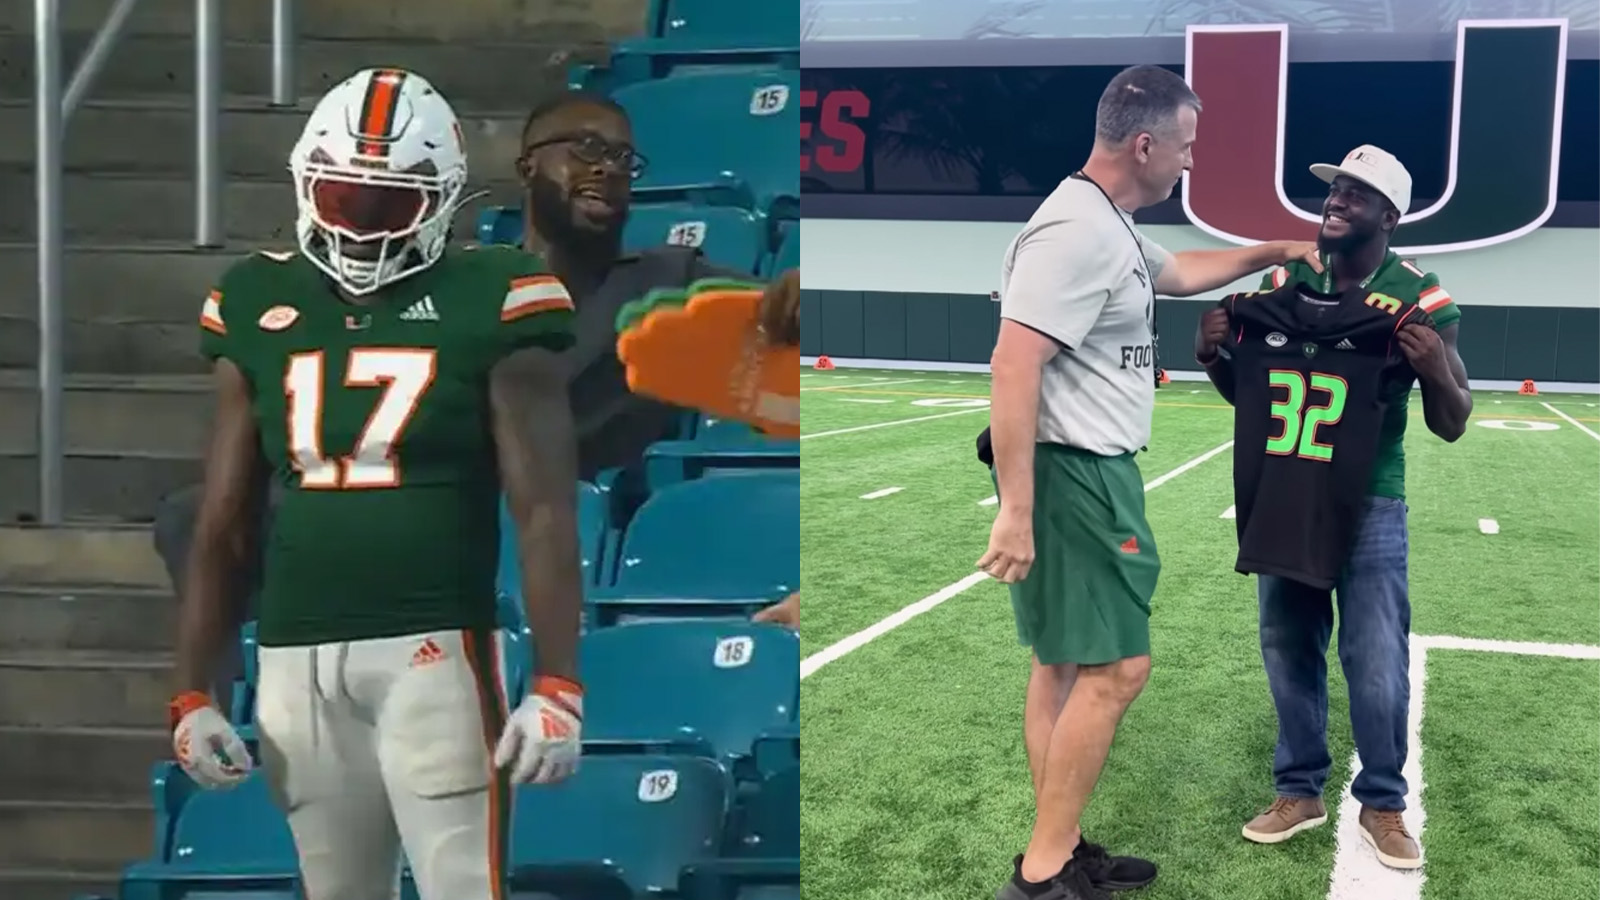 Miami fan who dresses in full uniform, pads honors his late brother